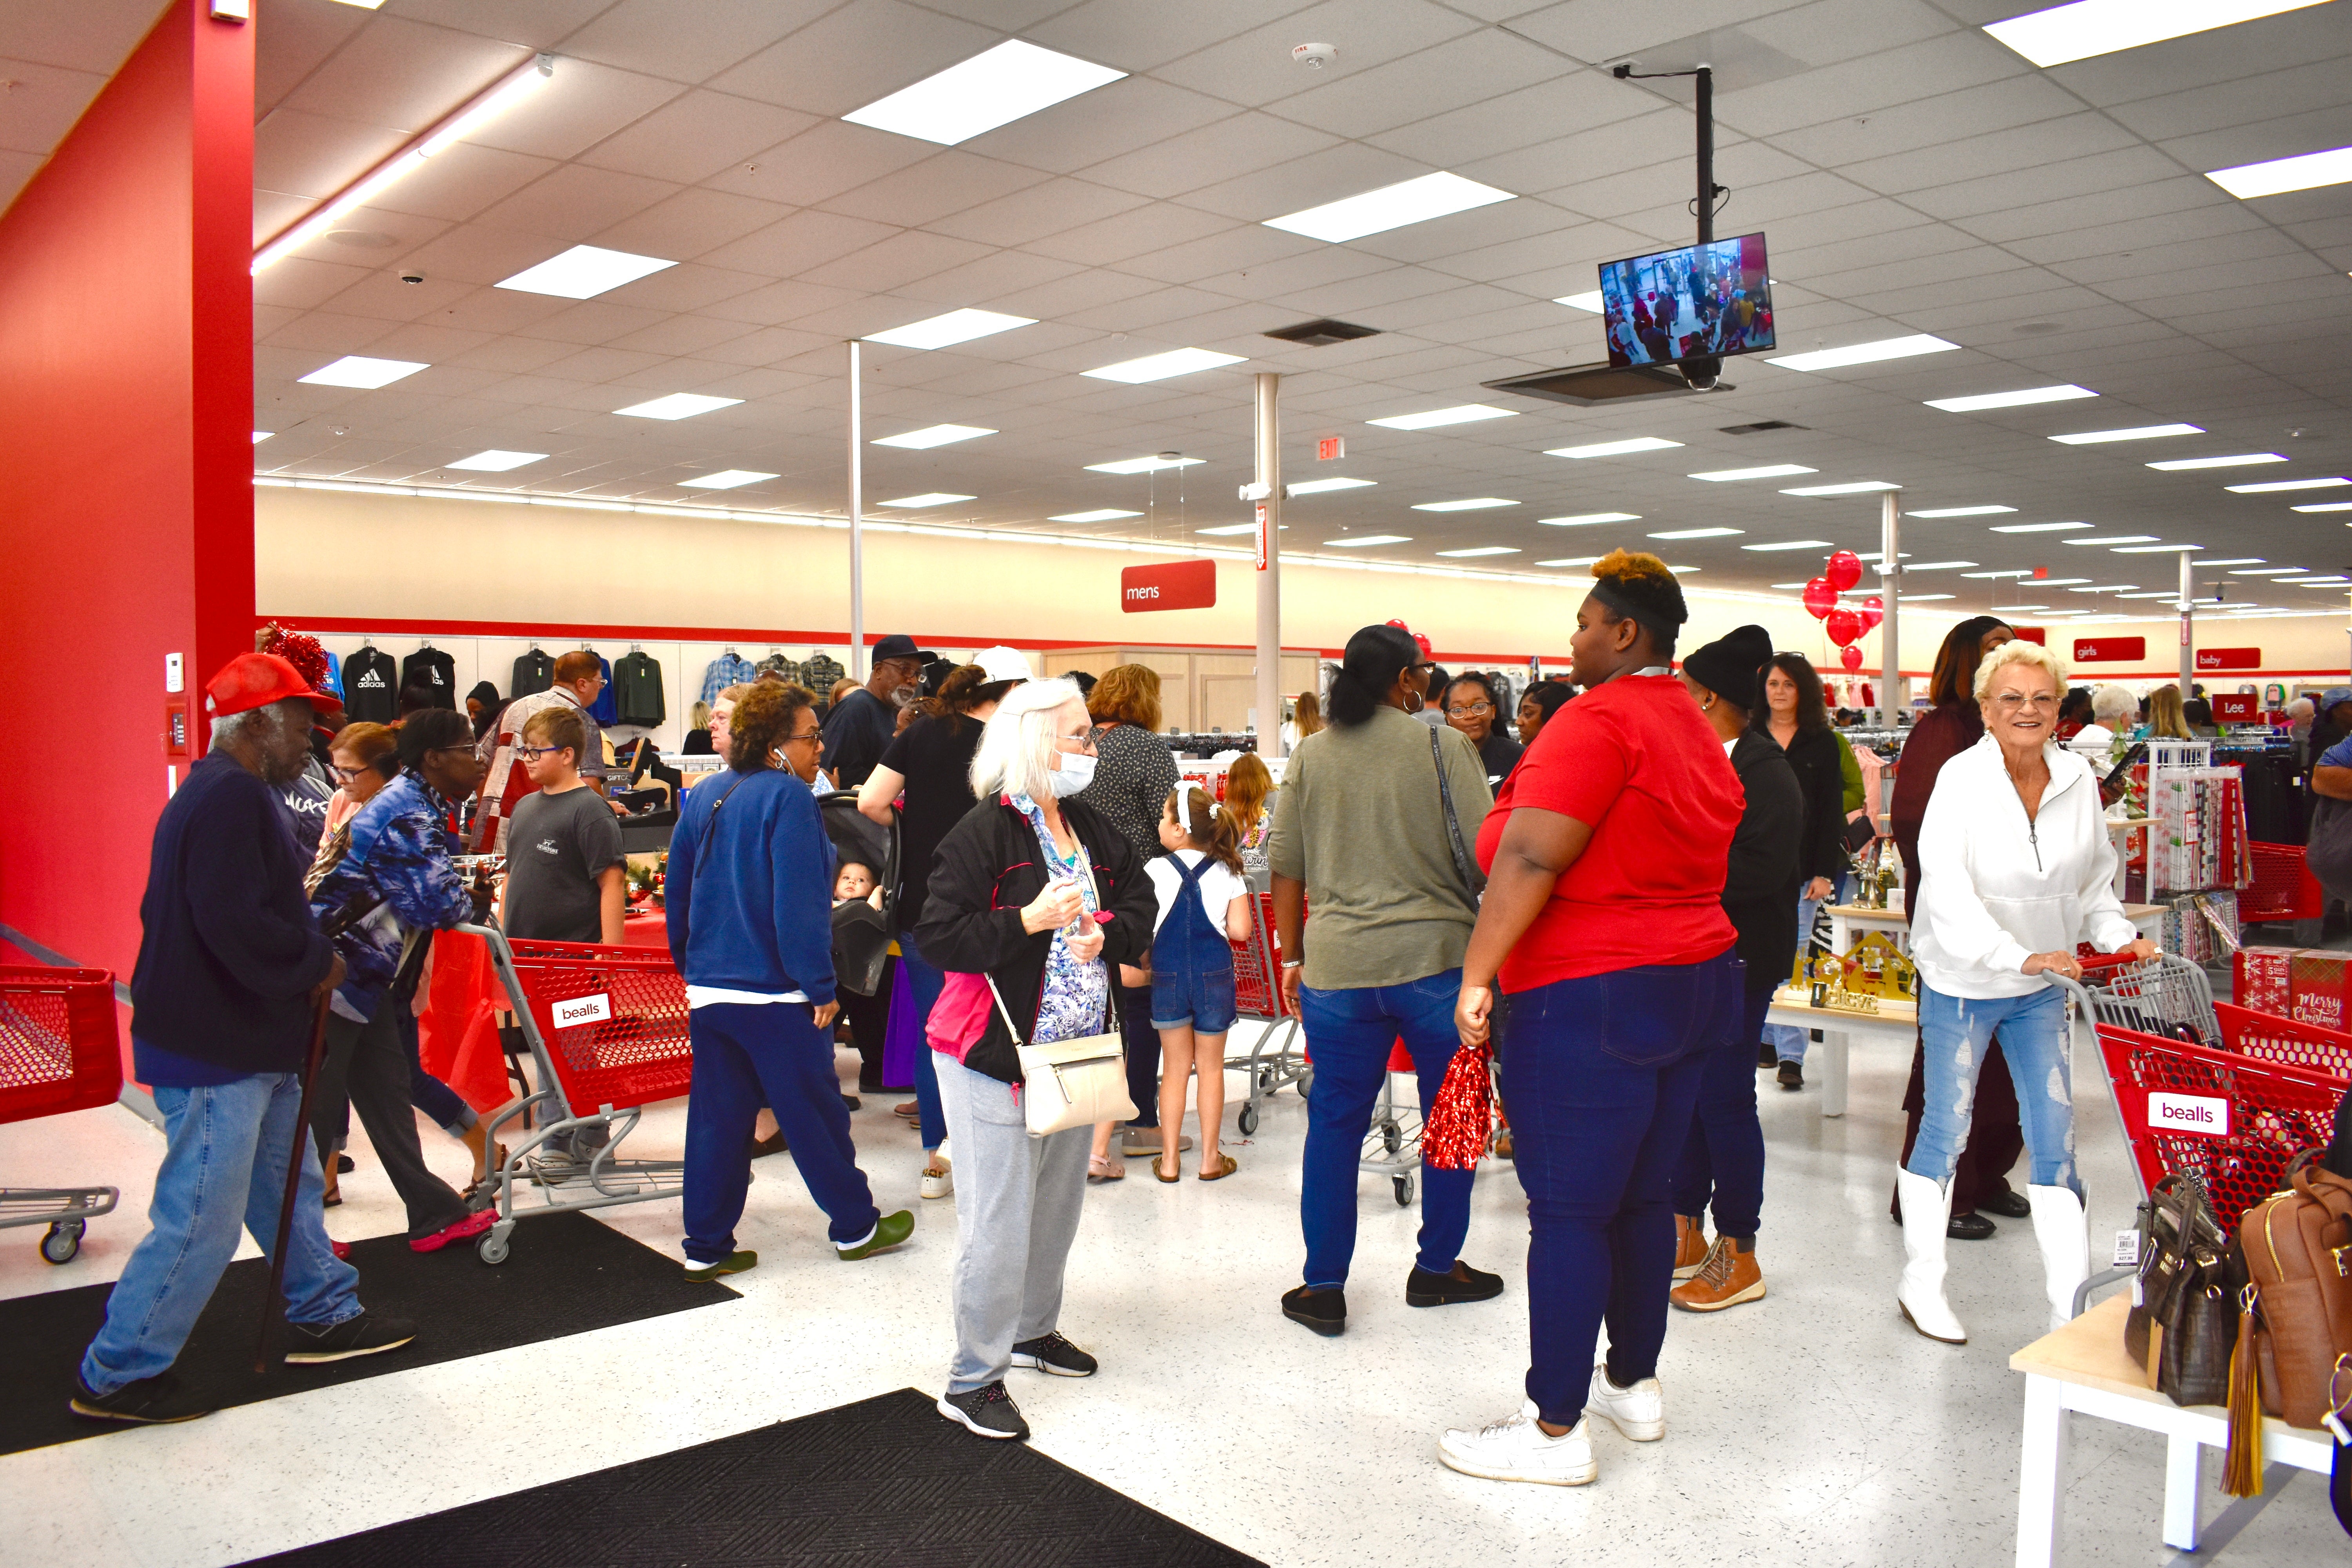 Bealls Outlet draws crowd at opening - The Greenville Advocate